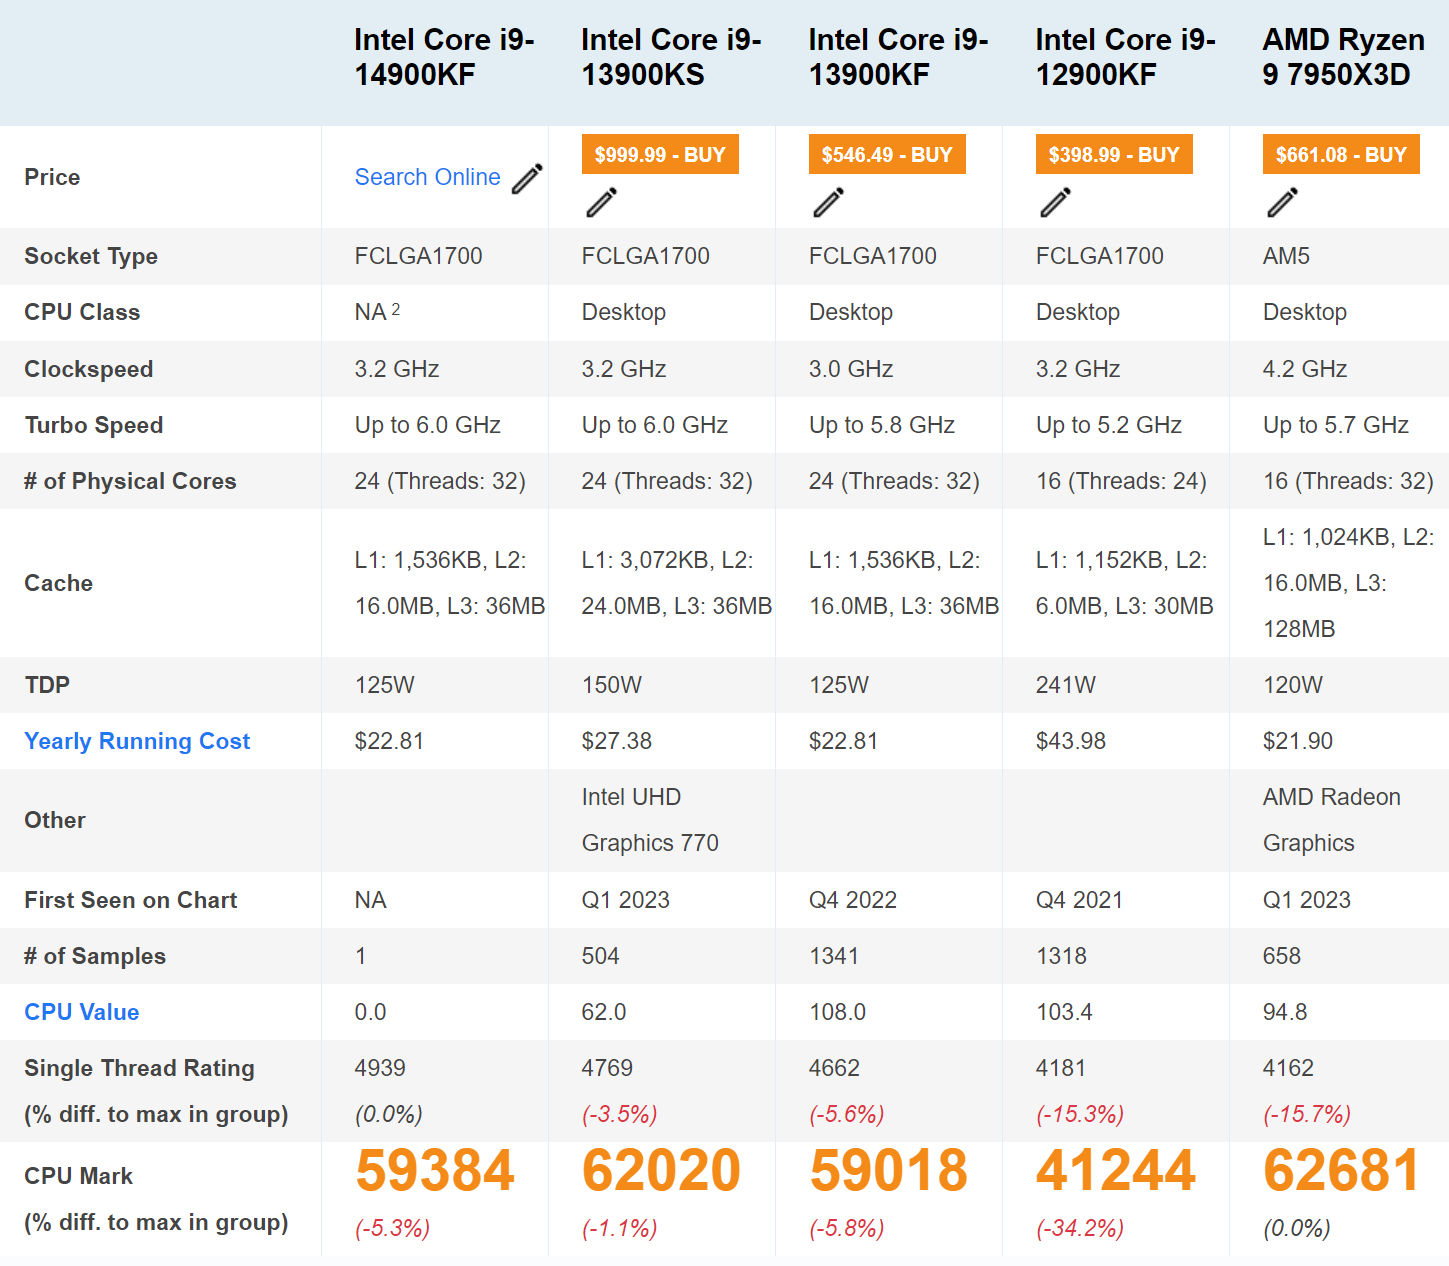 Intel Core i9-14900K vs Intel Core i9-13900K: What's the difference?